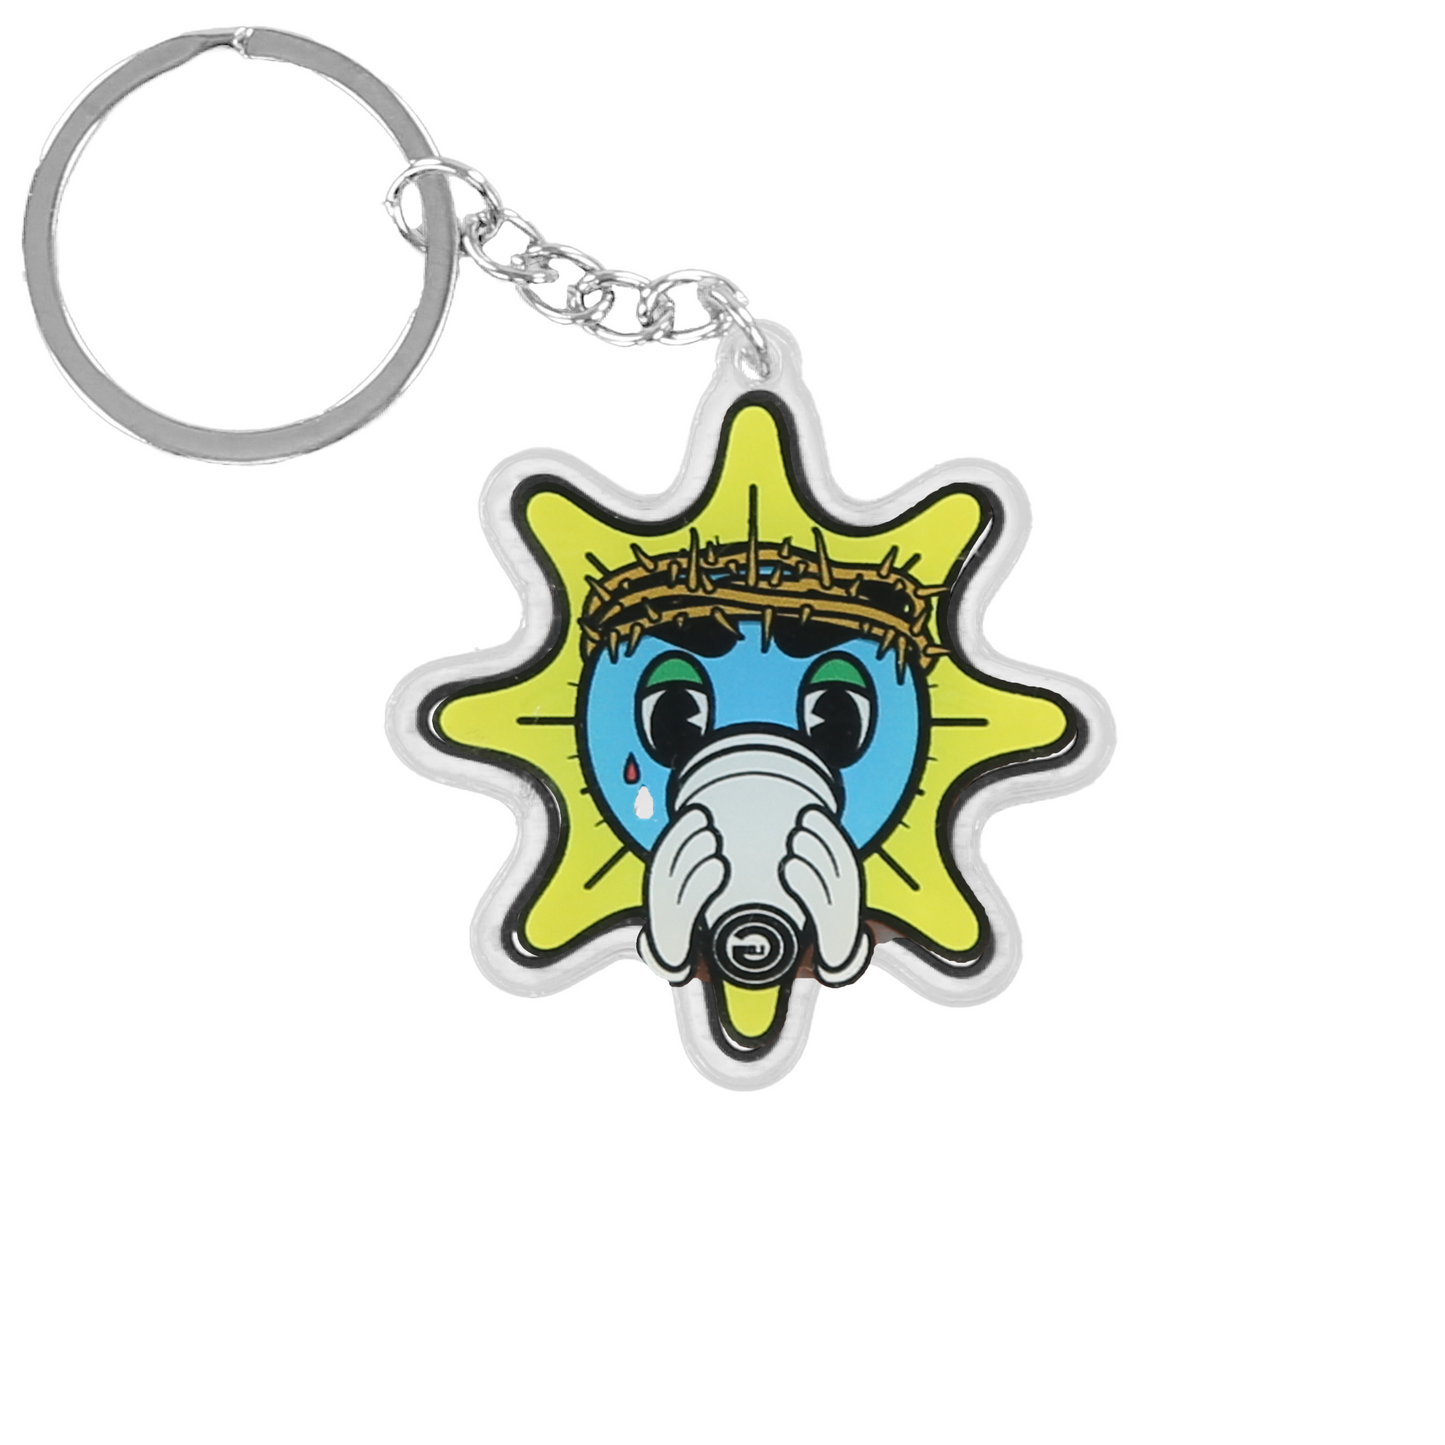 Glo Cup Keychain (Blue/Yellow)